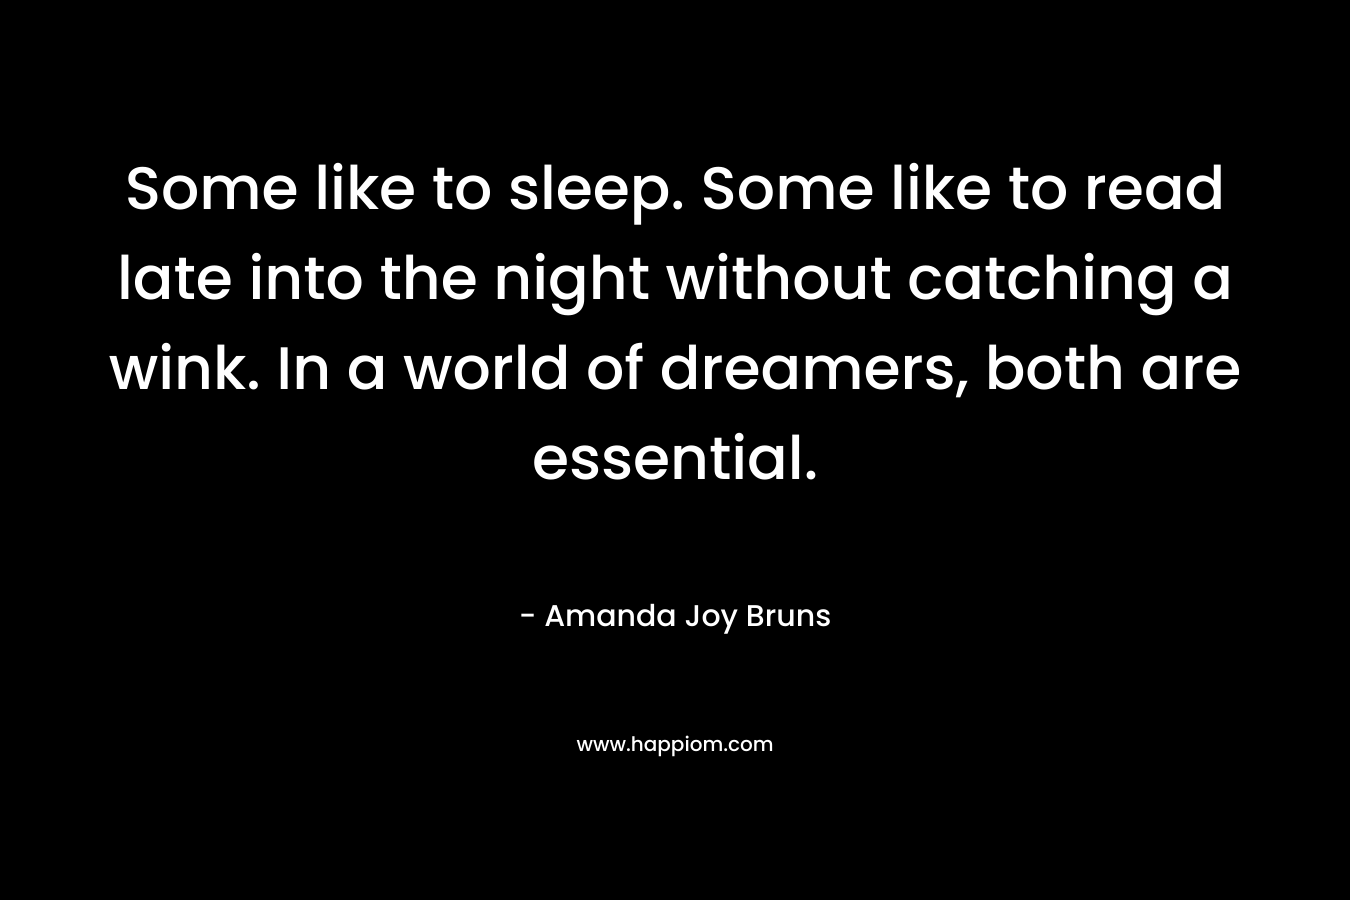 Some like to sleep. Some like to read late into the night without catching a wink. In a world of dreamers, both are essential. – Amanda Joy Bruns